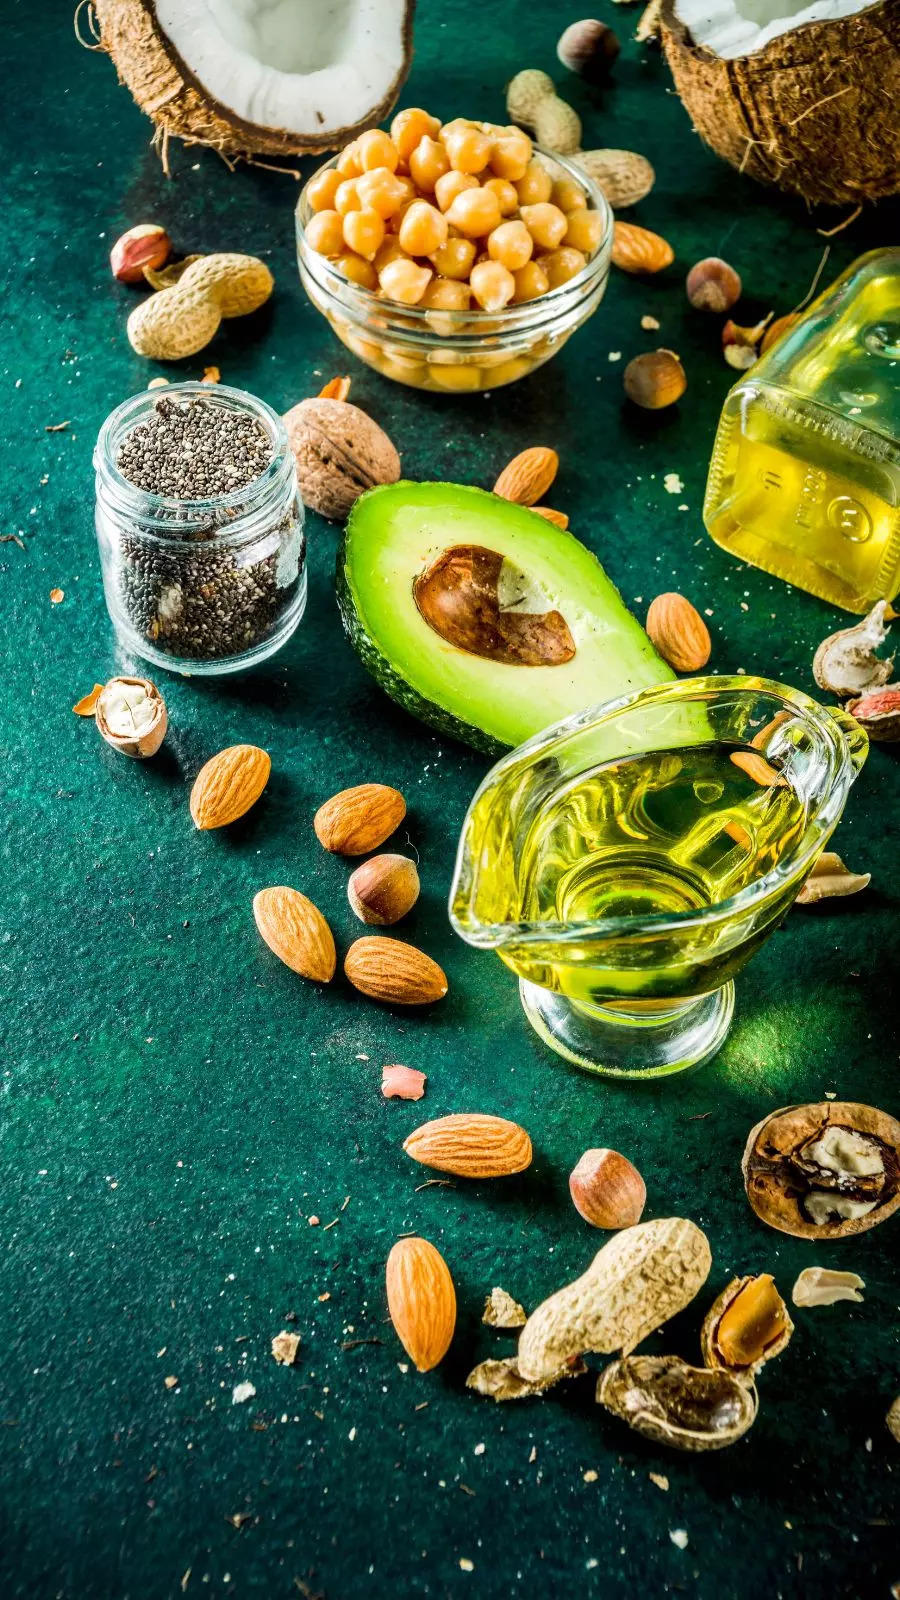 8 myths about consuming fats, busted 